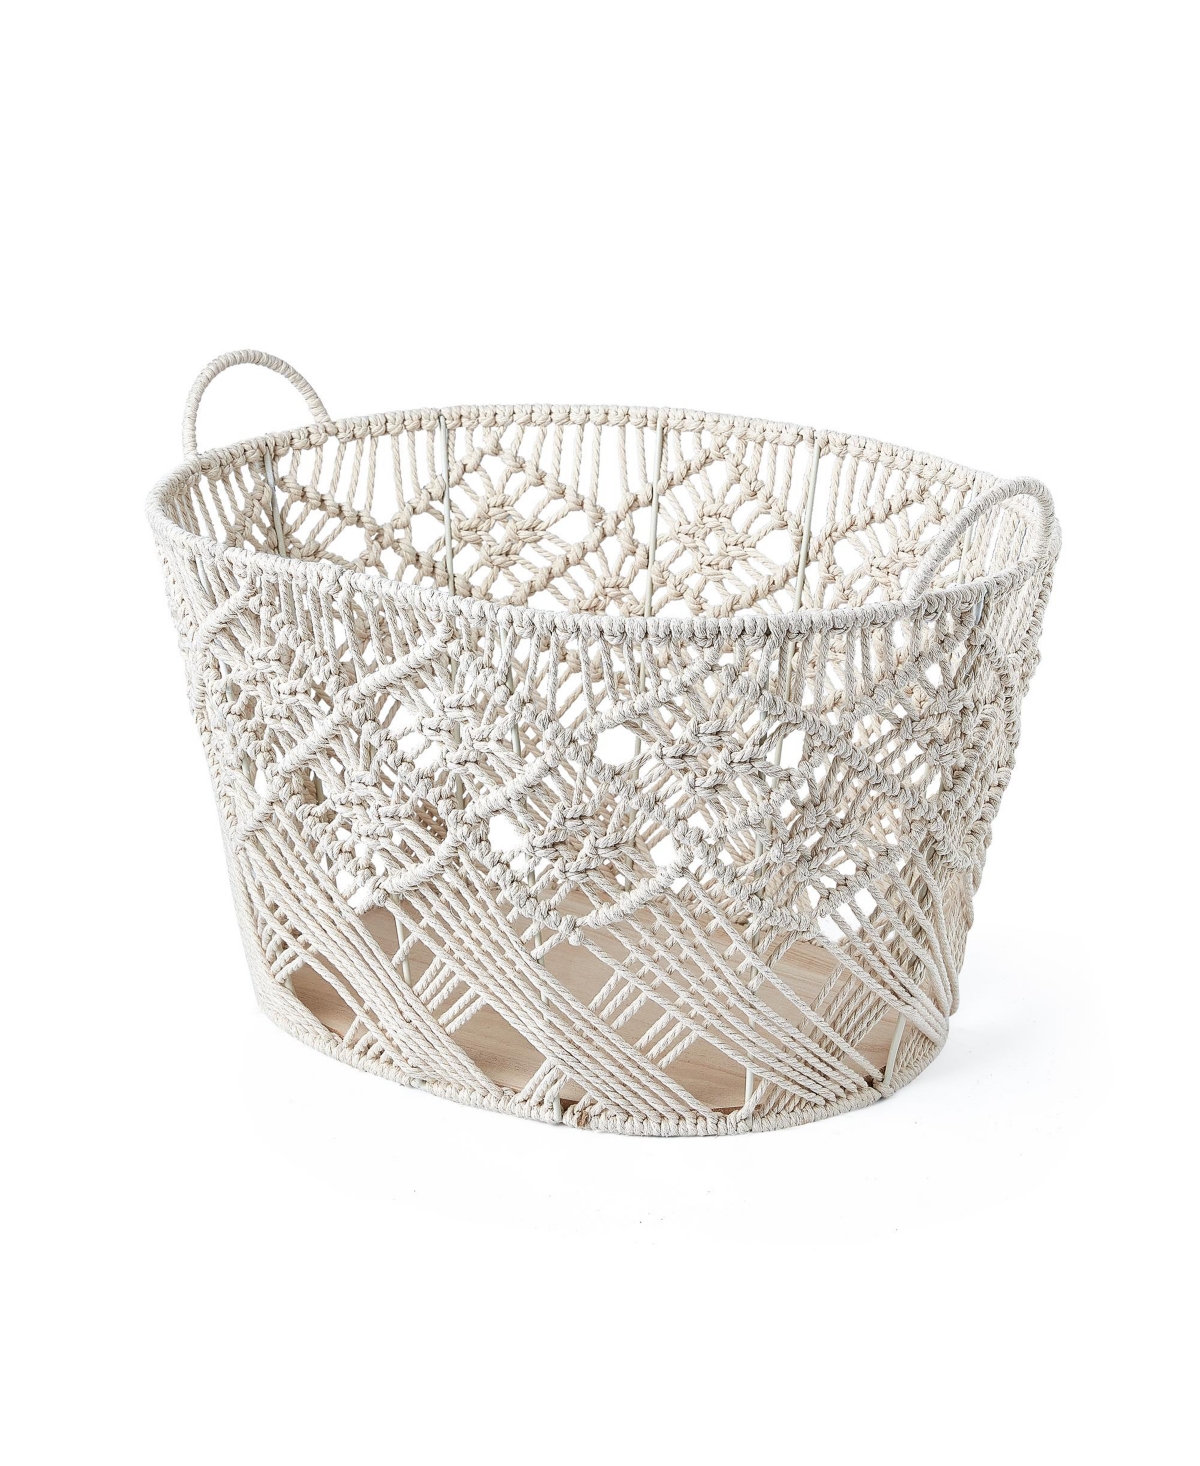 Shop Baum Macrame Oval Cotton Rope Storage Bins With Ear Handles And Wood Base, Set Of 3 In White